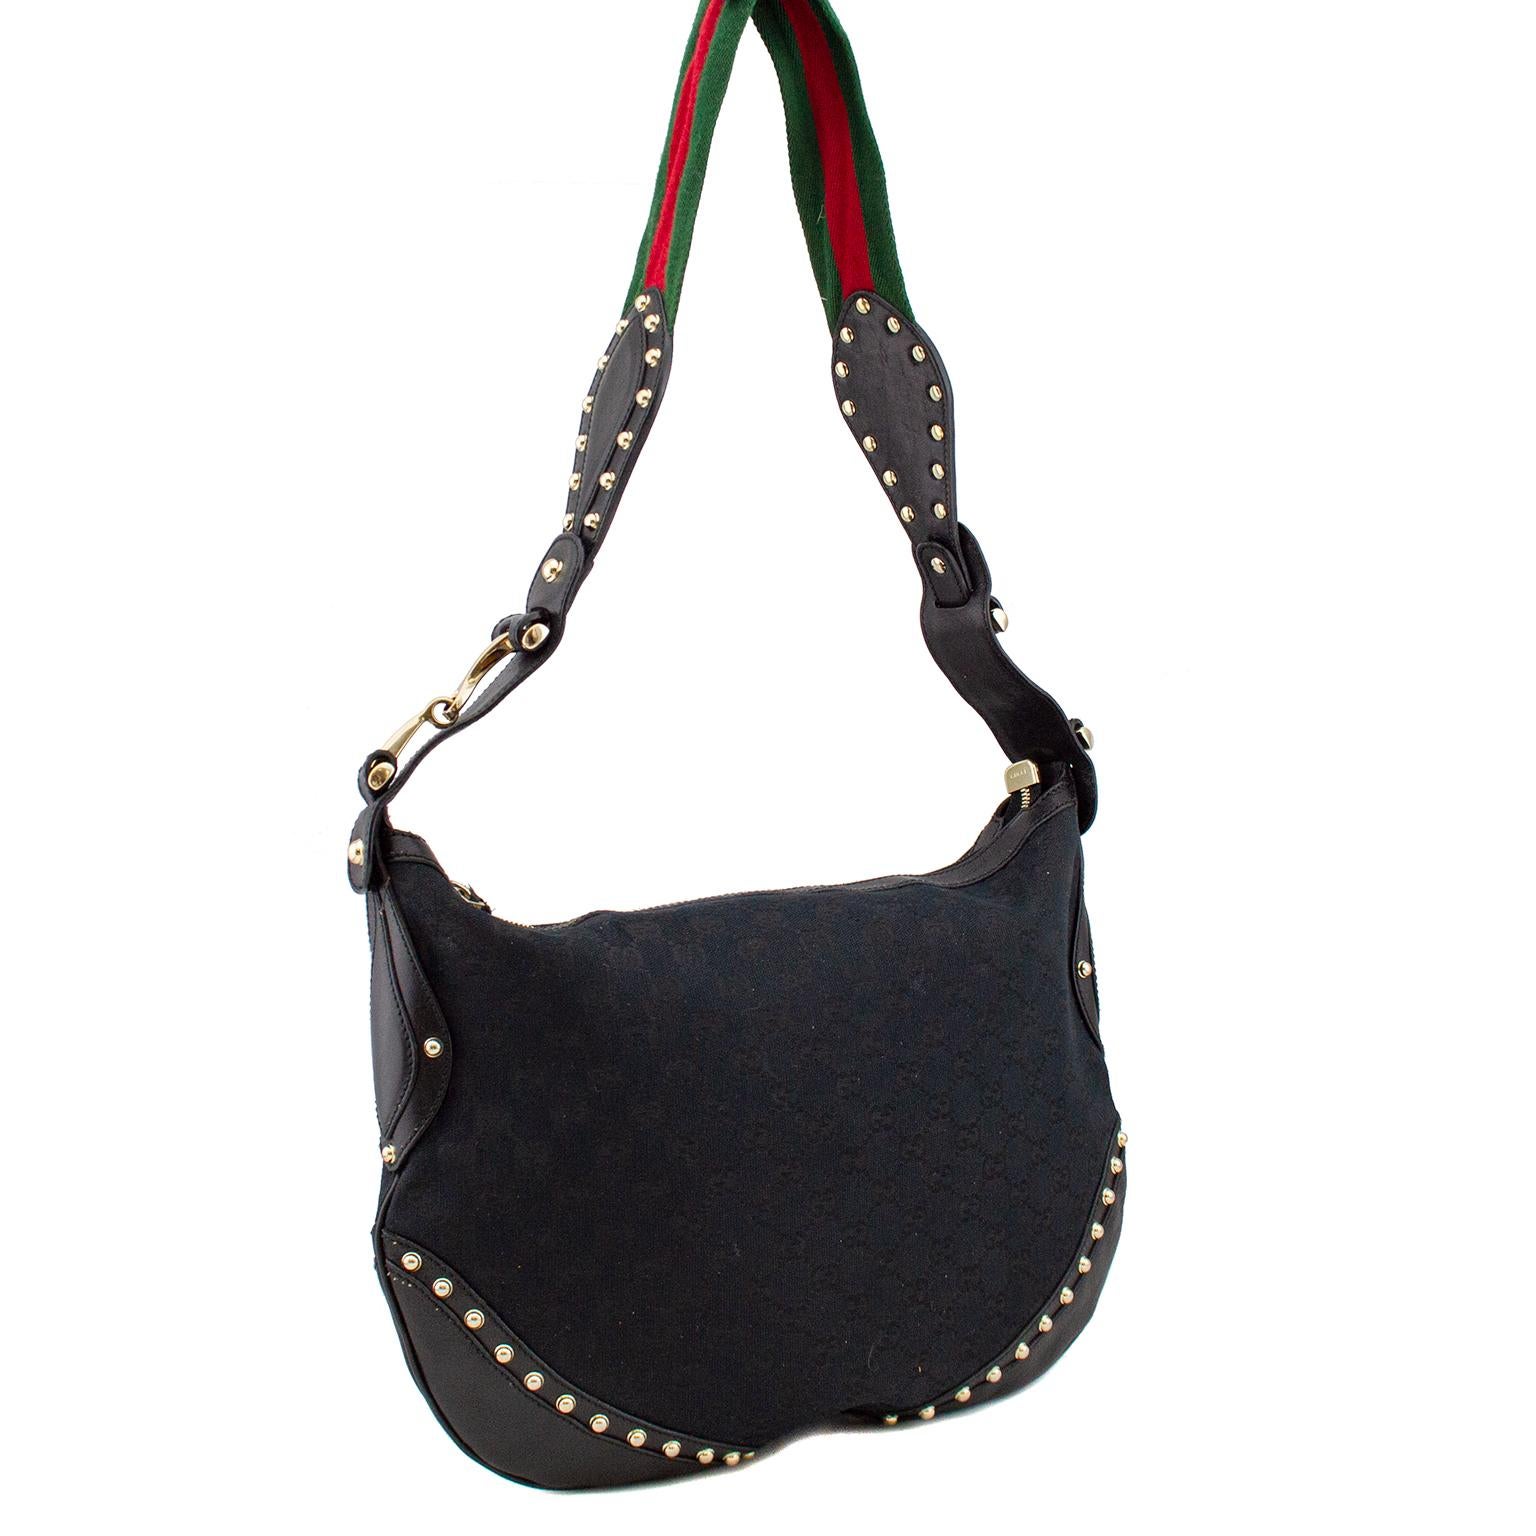 Early 2000's  Gucci black GG canvas messenger bag with gold tone metal hardware and studs, flat red and green canvas web shoulder strap, black leather trim. An updated version of the iconic Gucci horse bit on either side of strap. Black woven